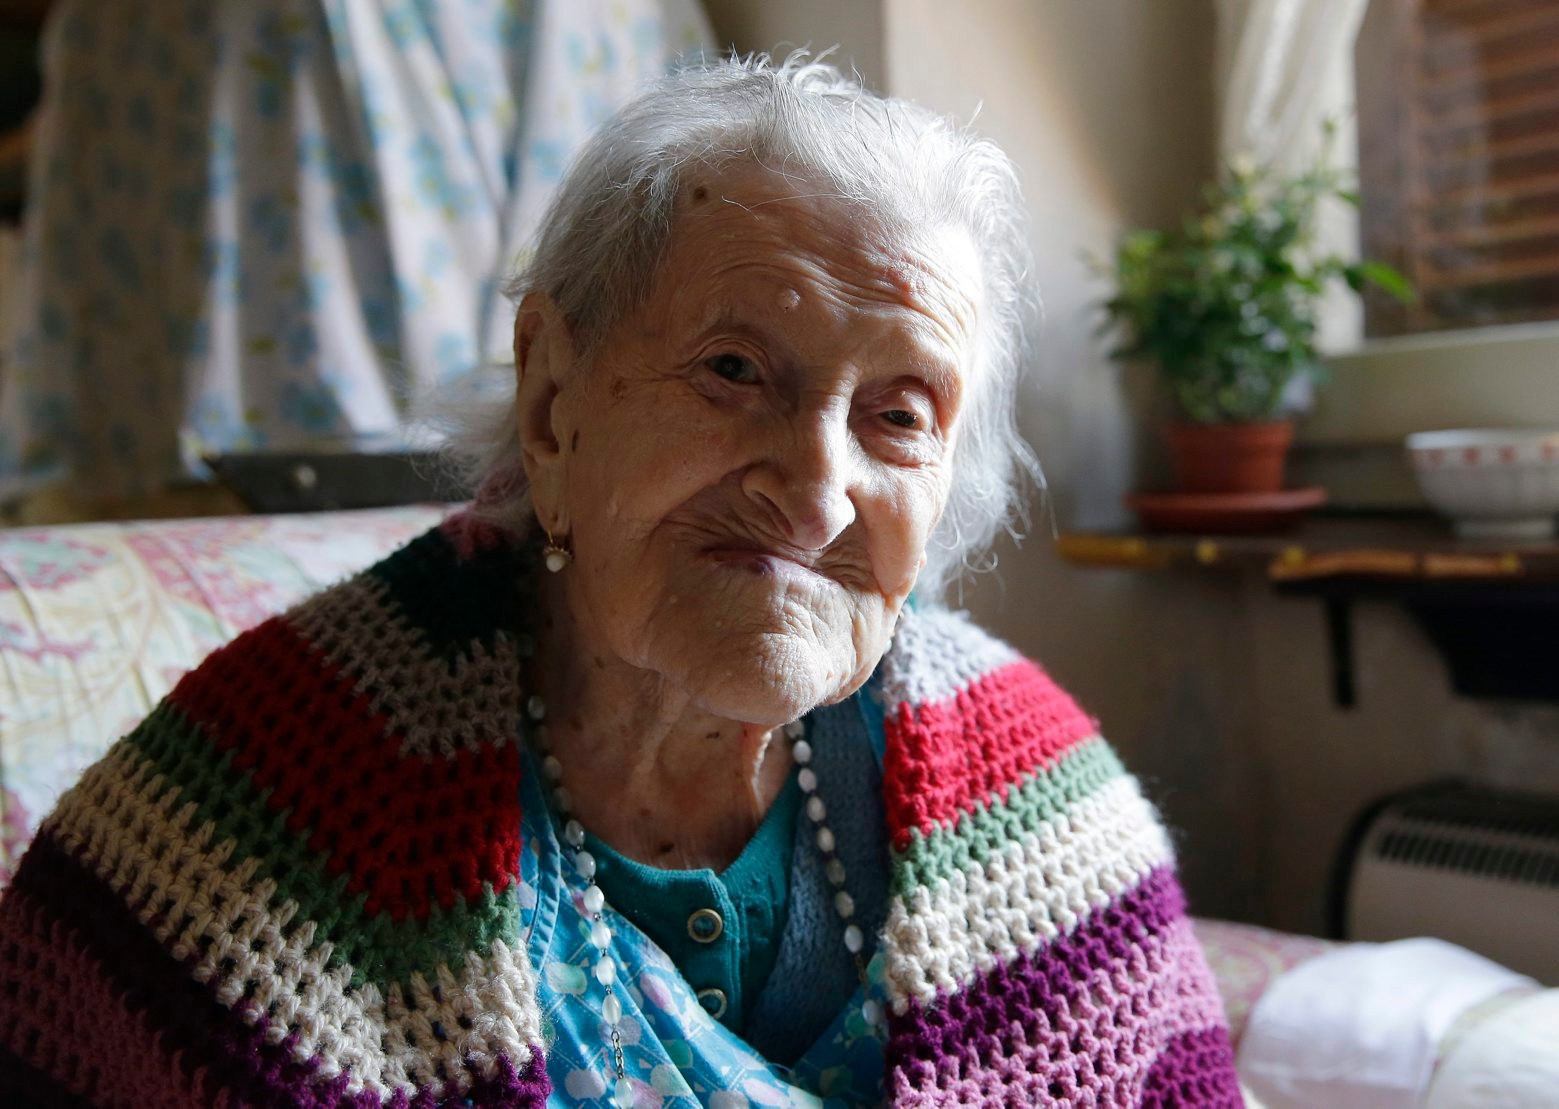 FILE - In this Friday, June 26, 2015 photo, Emma Morano, 115, sits in her apartment in Verbania, Italy. At 115 years of age, Emma is now the oldest person in the world and is believed to be the last surviving person in the world who was born in the 1800s, coming into the world on Nov. 29, 1899. Thatís just 4 and a half months after Susannah Mushatt Jones, who died Thursday in New York at the age of 116. (AP Photo/Antonio Calanni, File) Italy World's Oldest Person